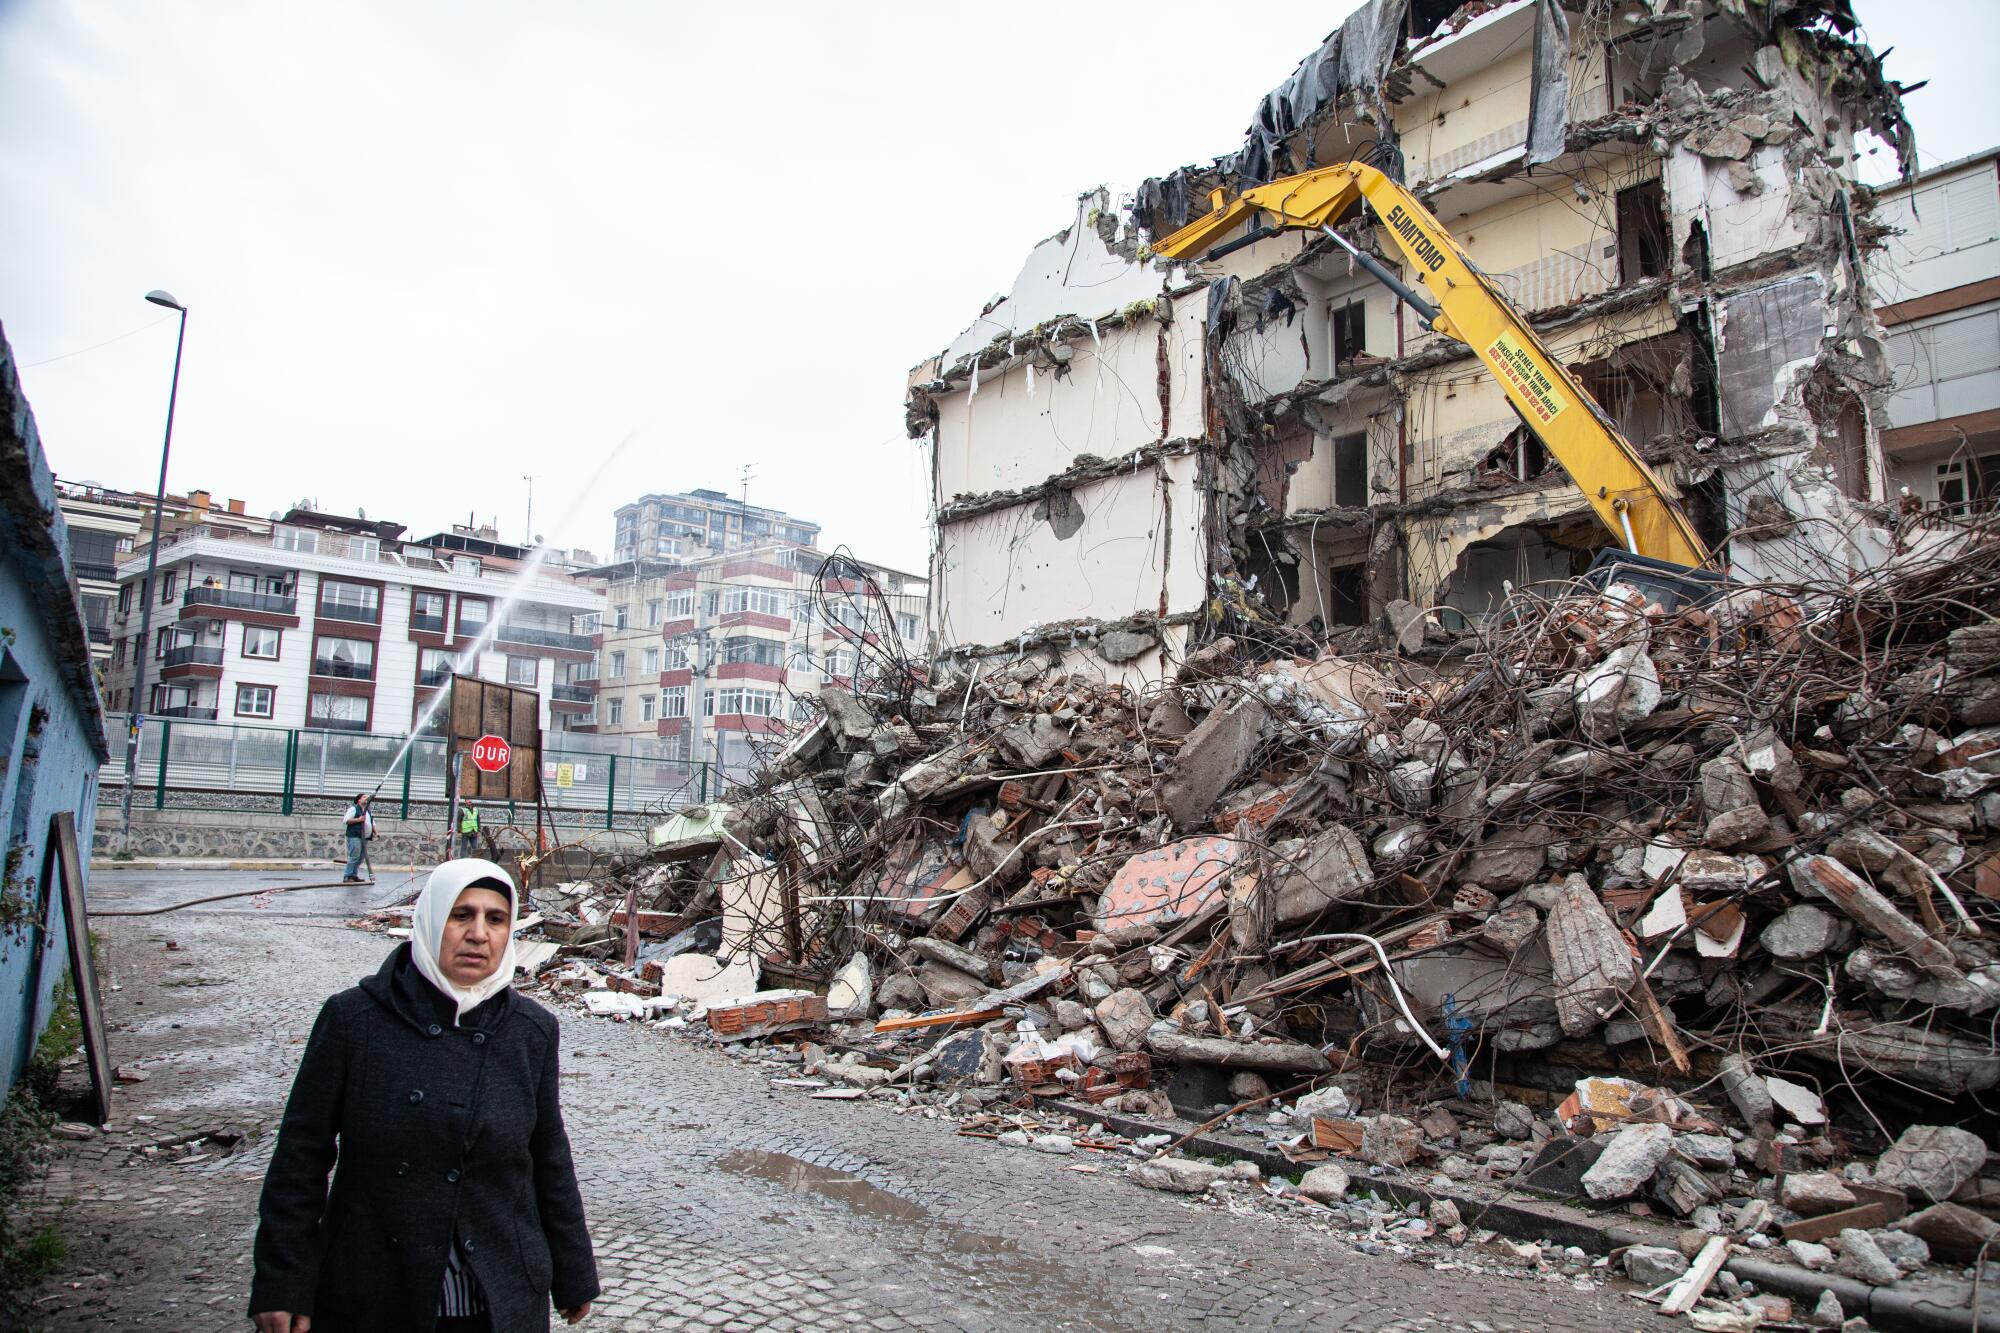 A woman in dark clothes and white headscarf walks near a building under demolition, with rubble piled high 